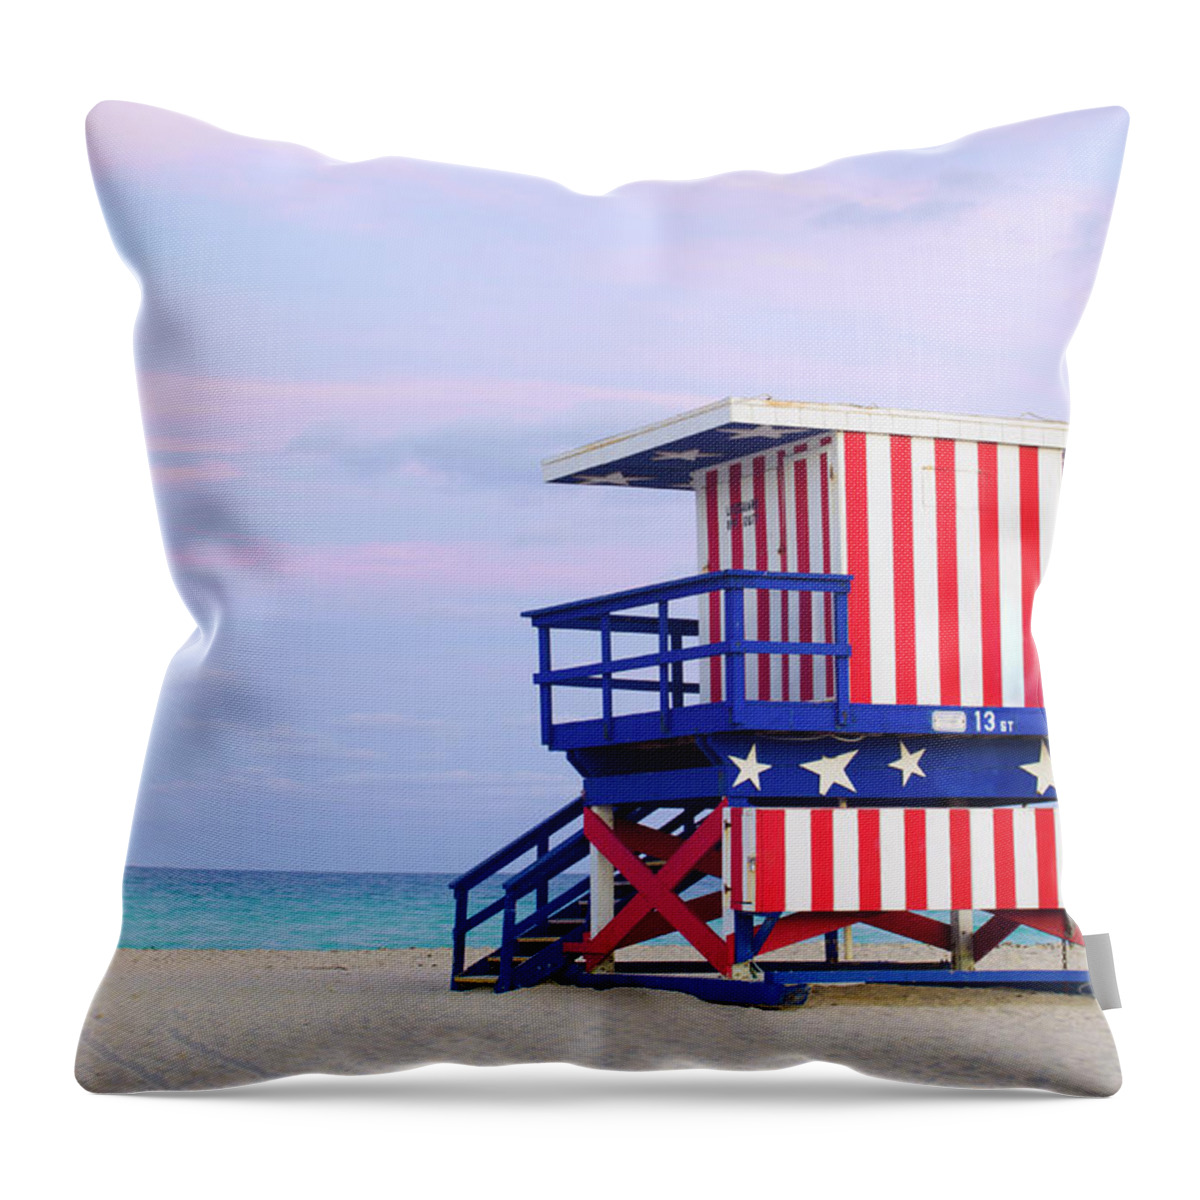 Beach Hut Throw Pillow featuring the photograph 13th Street Lifeguard Hut In Miami by Gregobagel